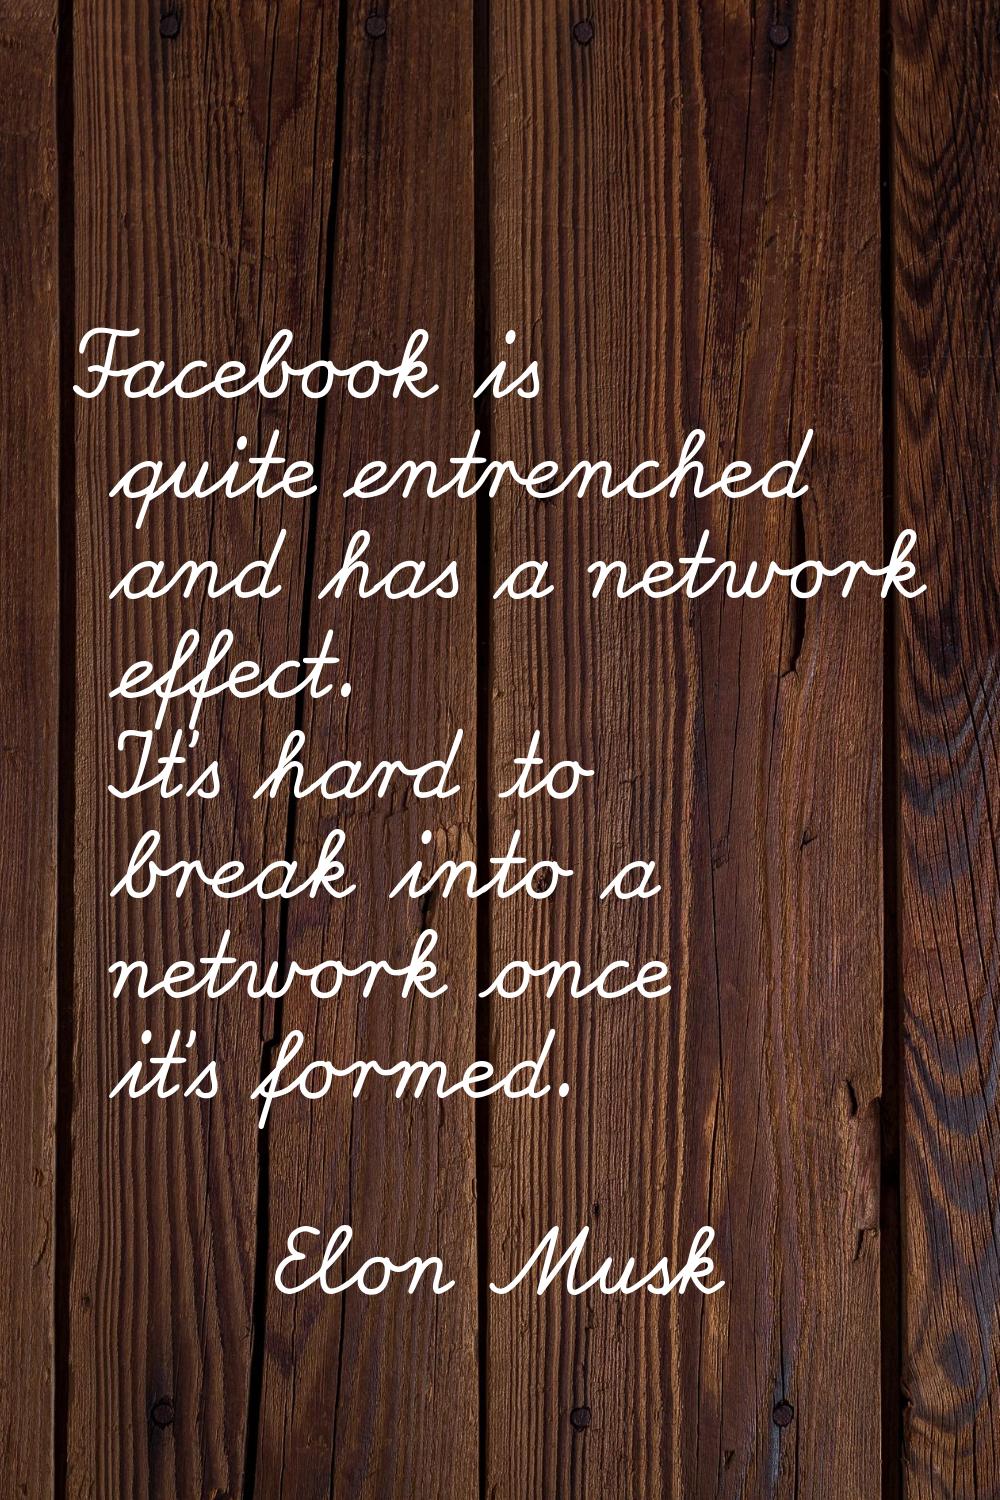 Facebook is quite entrenched and has a network effect. It's hard to break into a network once it's 